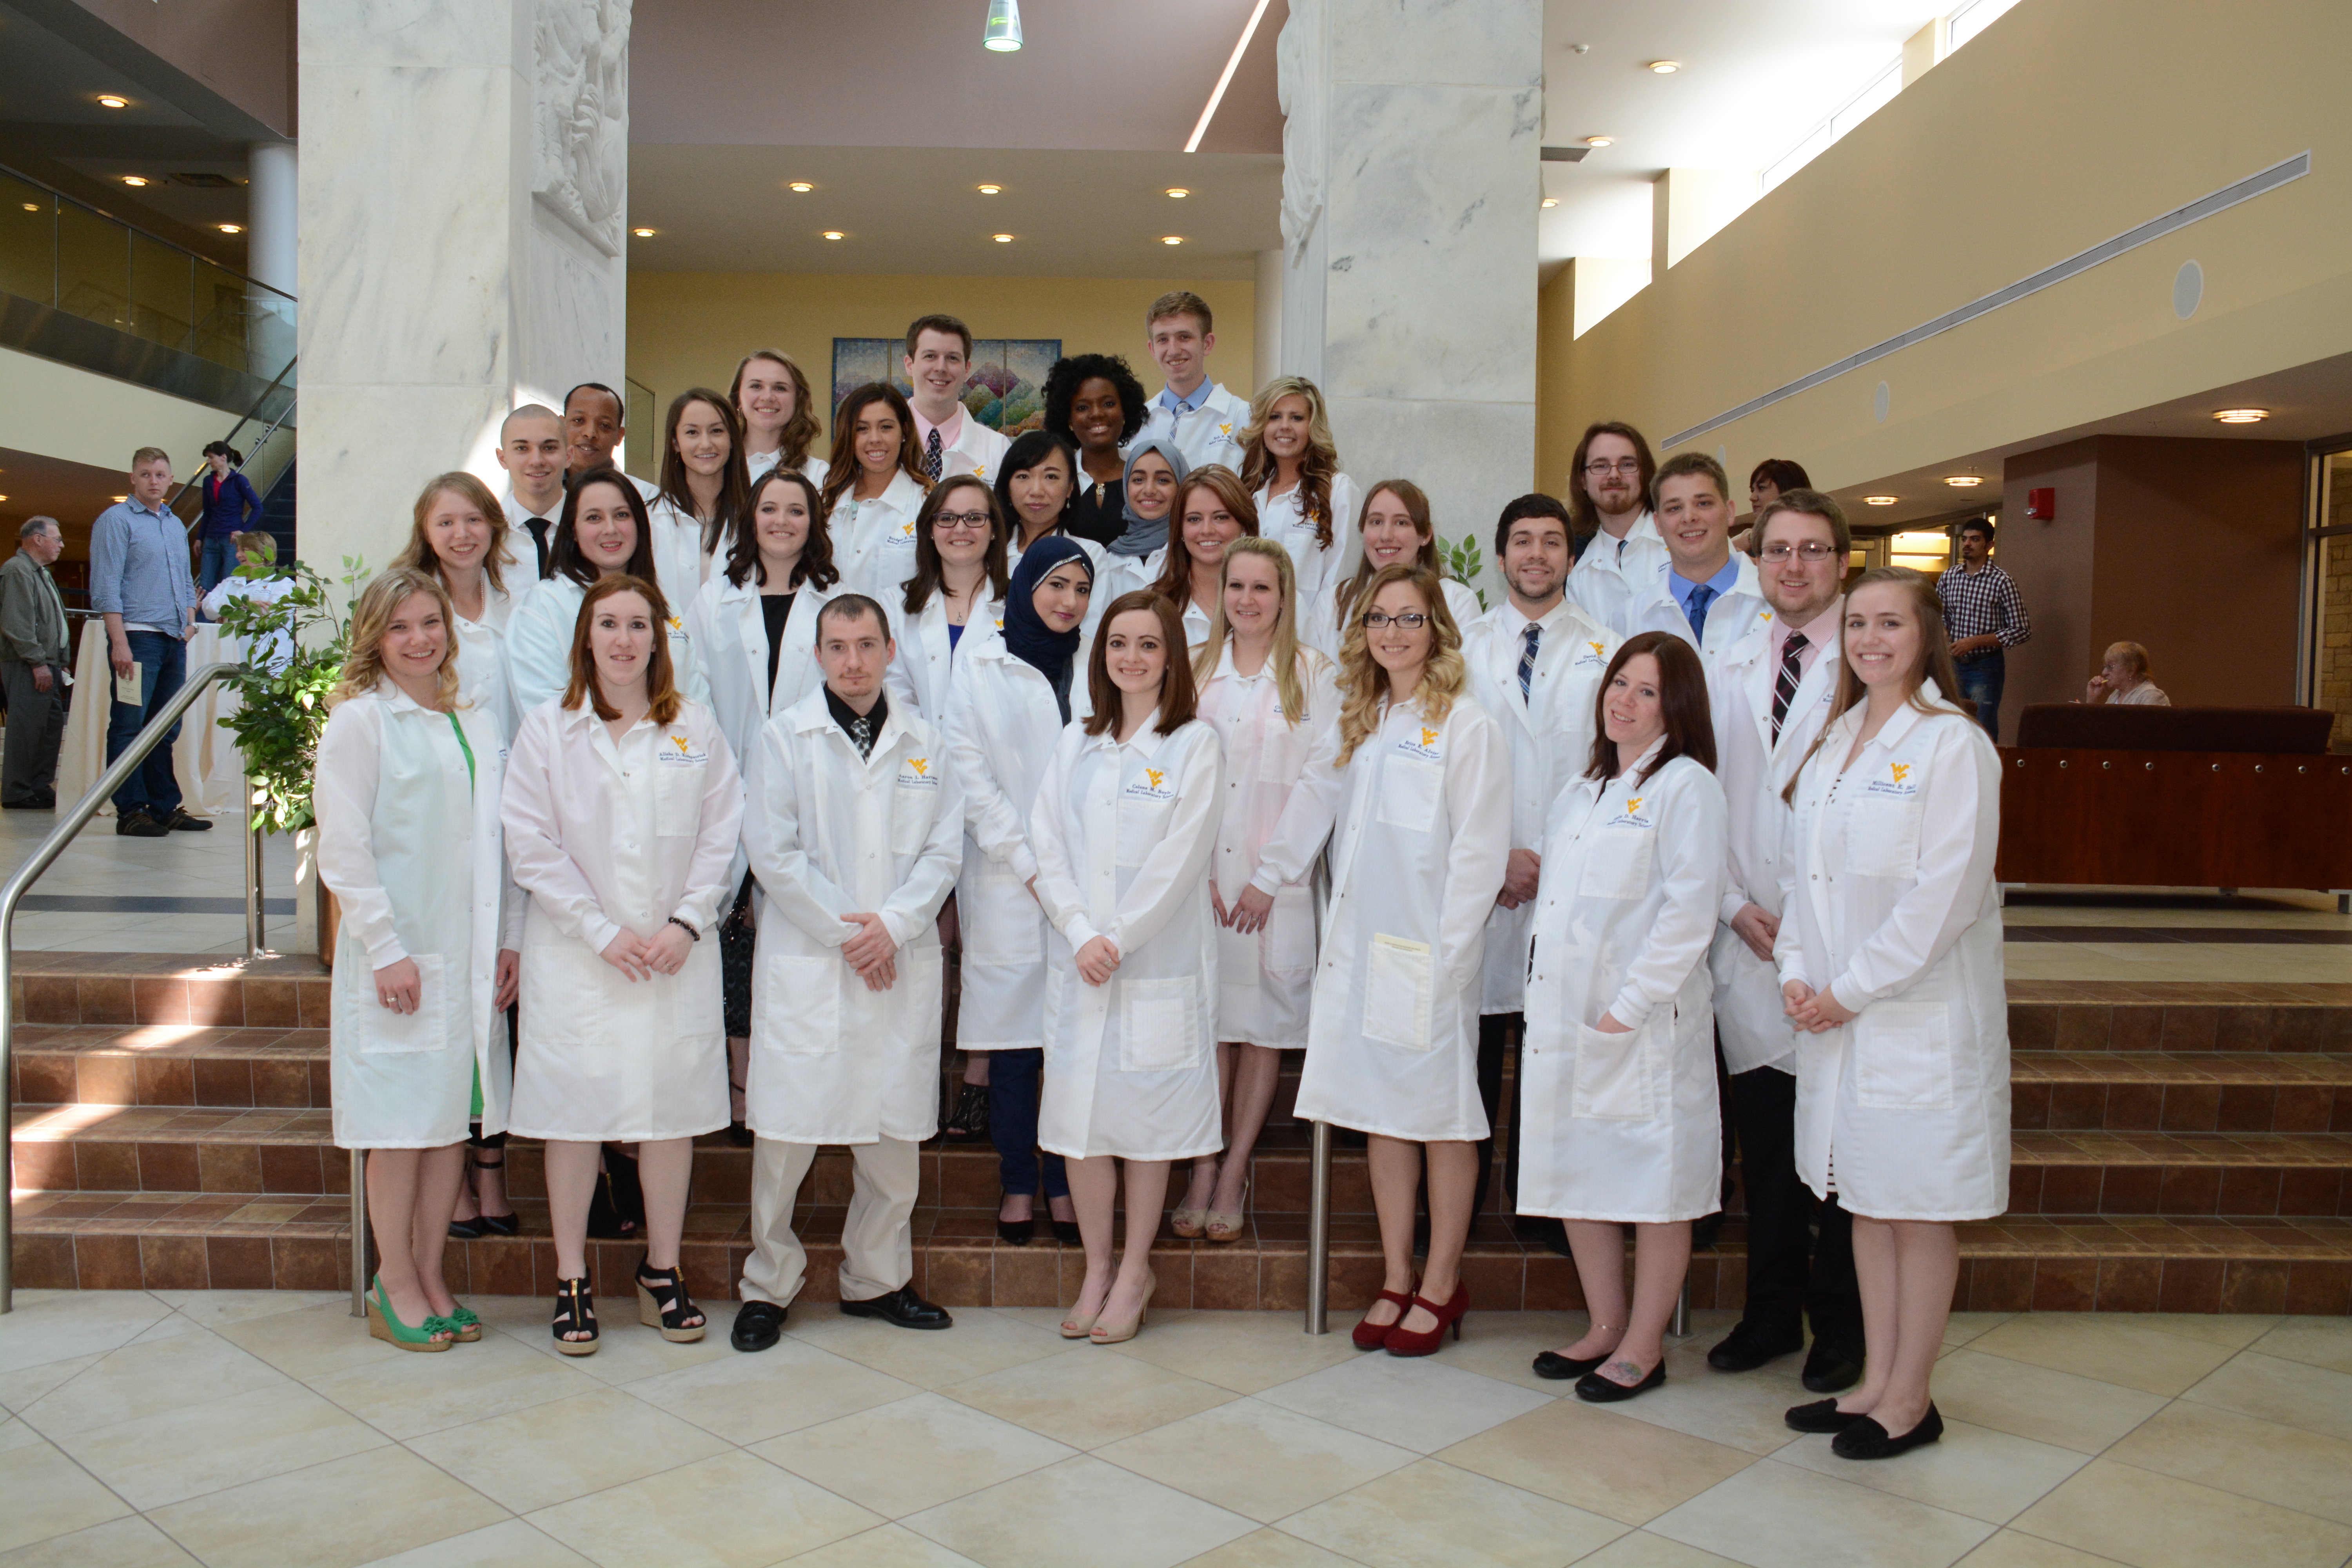 MLS students display their white coats after ceremony